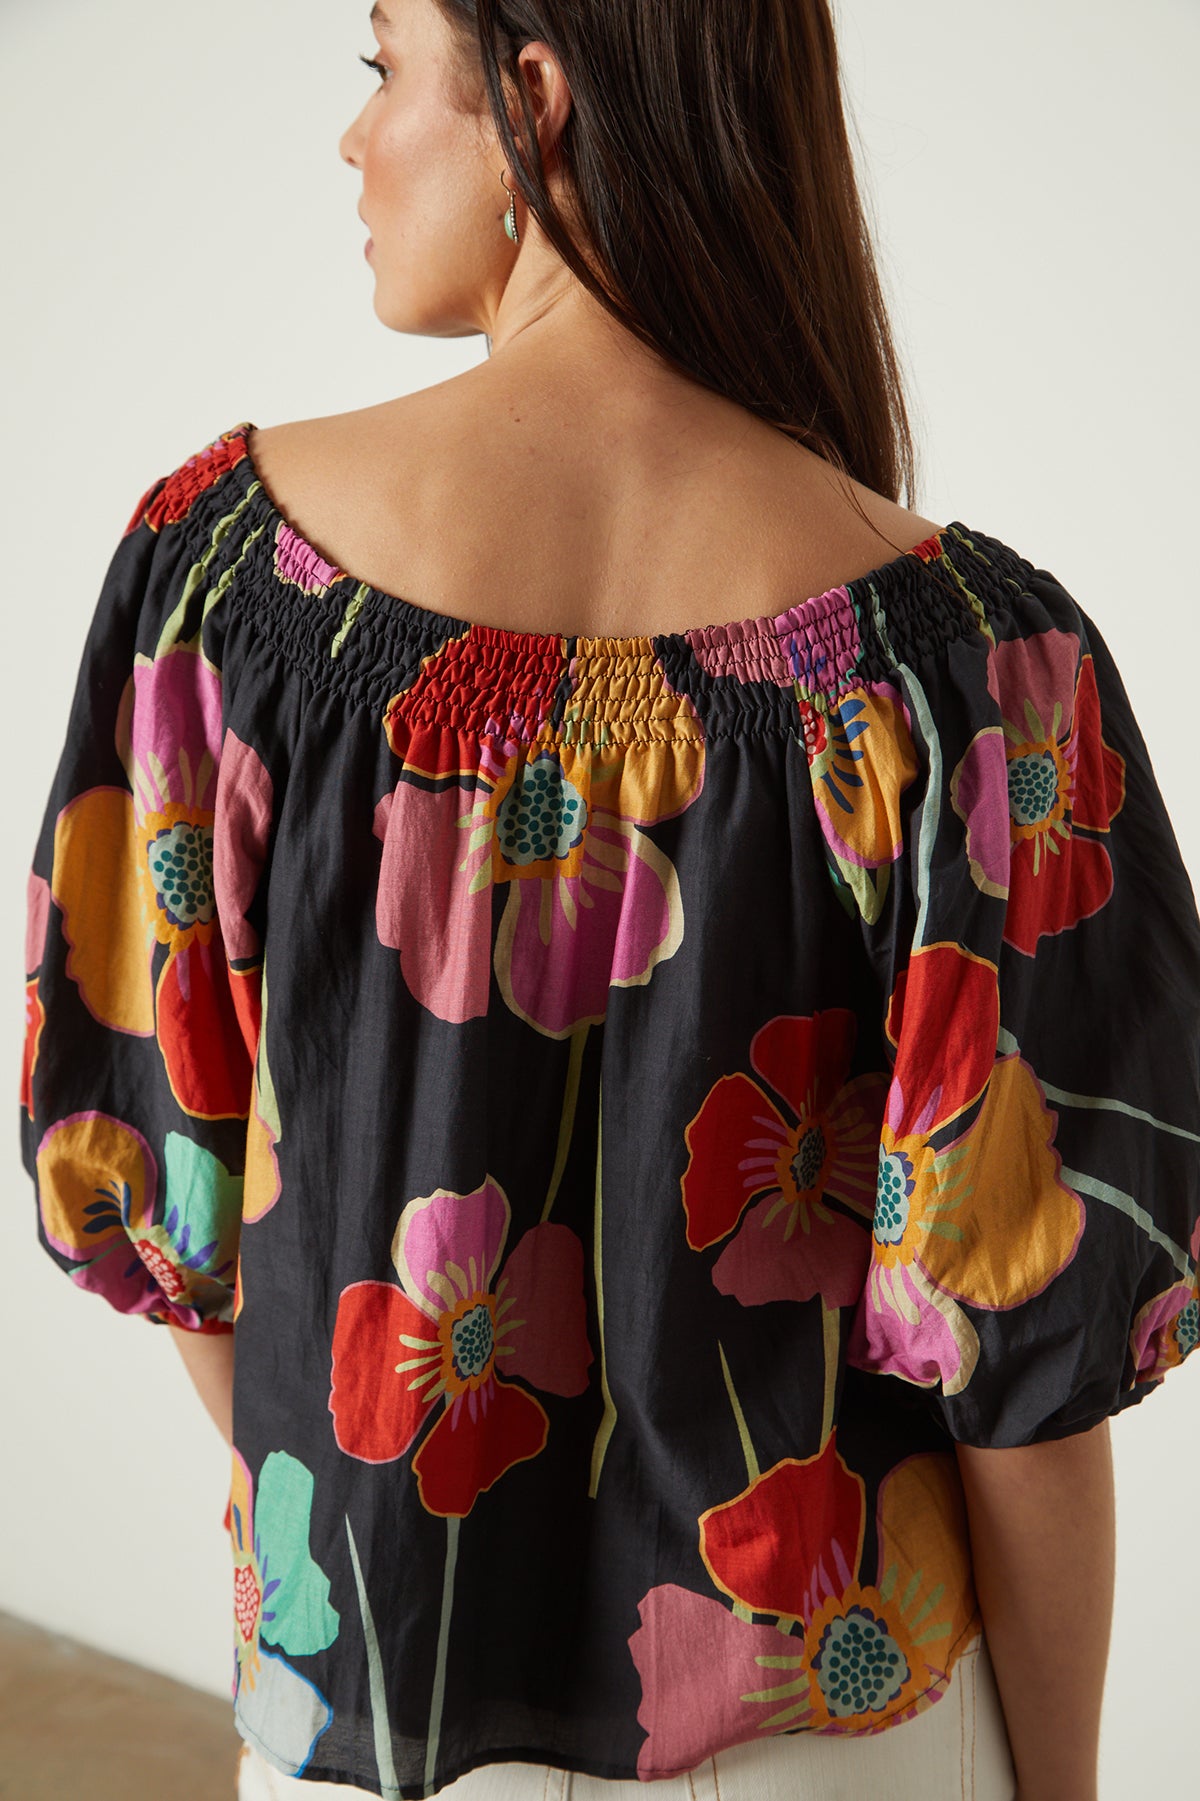 Jasmine Top in bold floral with black background back close up-26143149686977